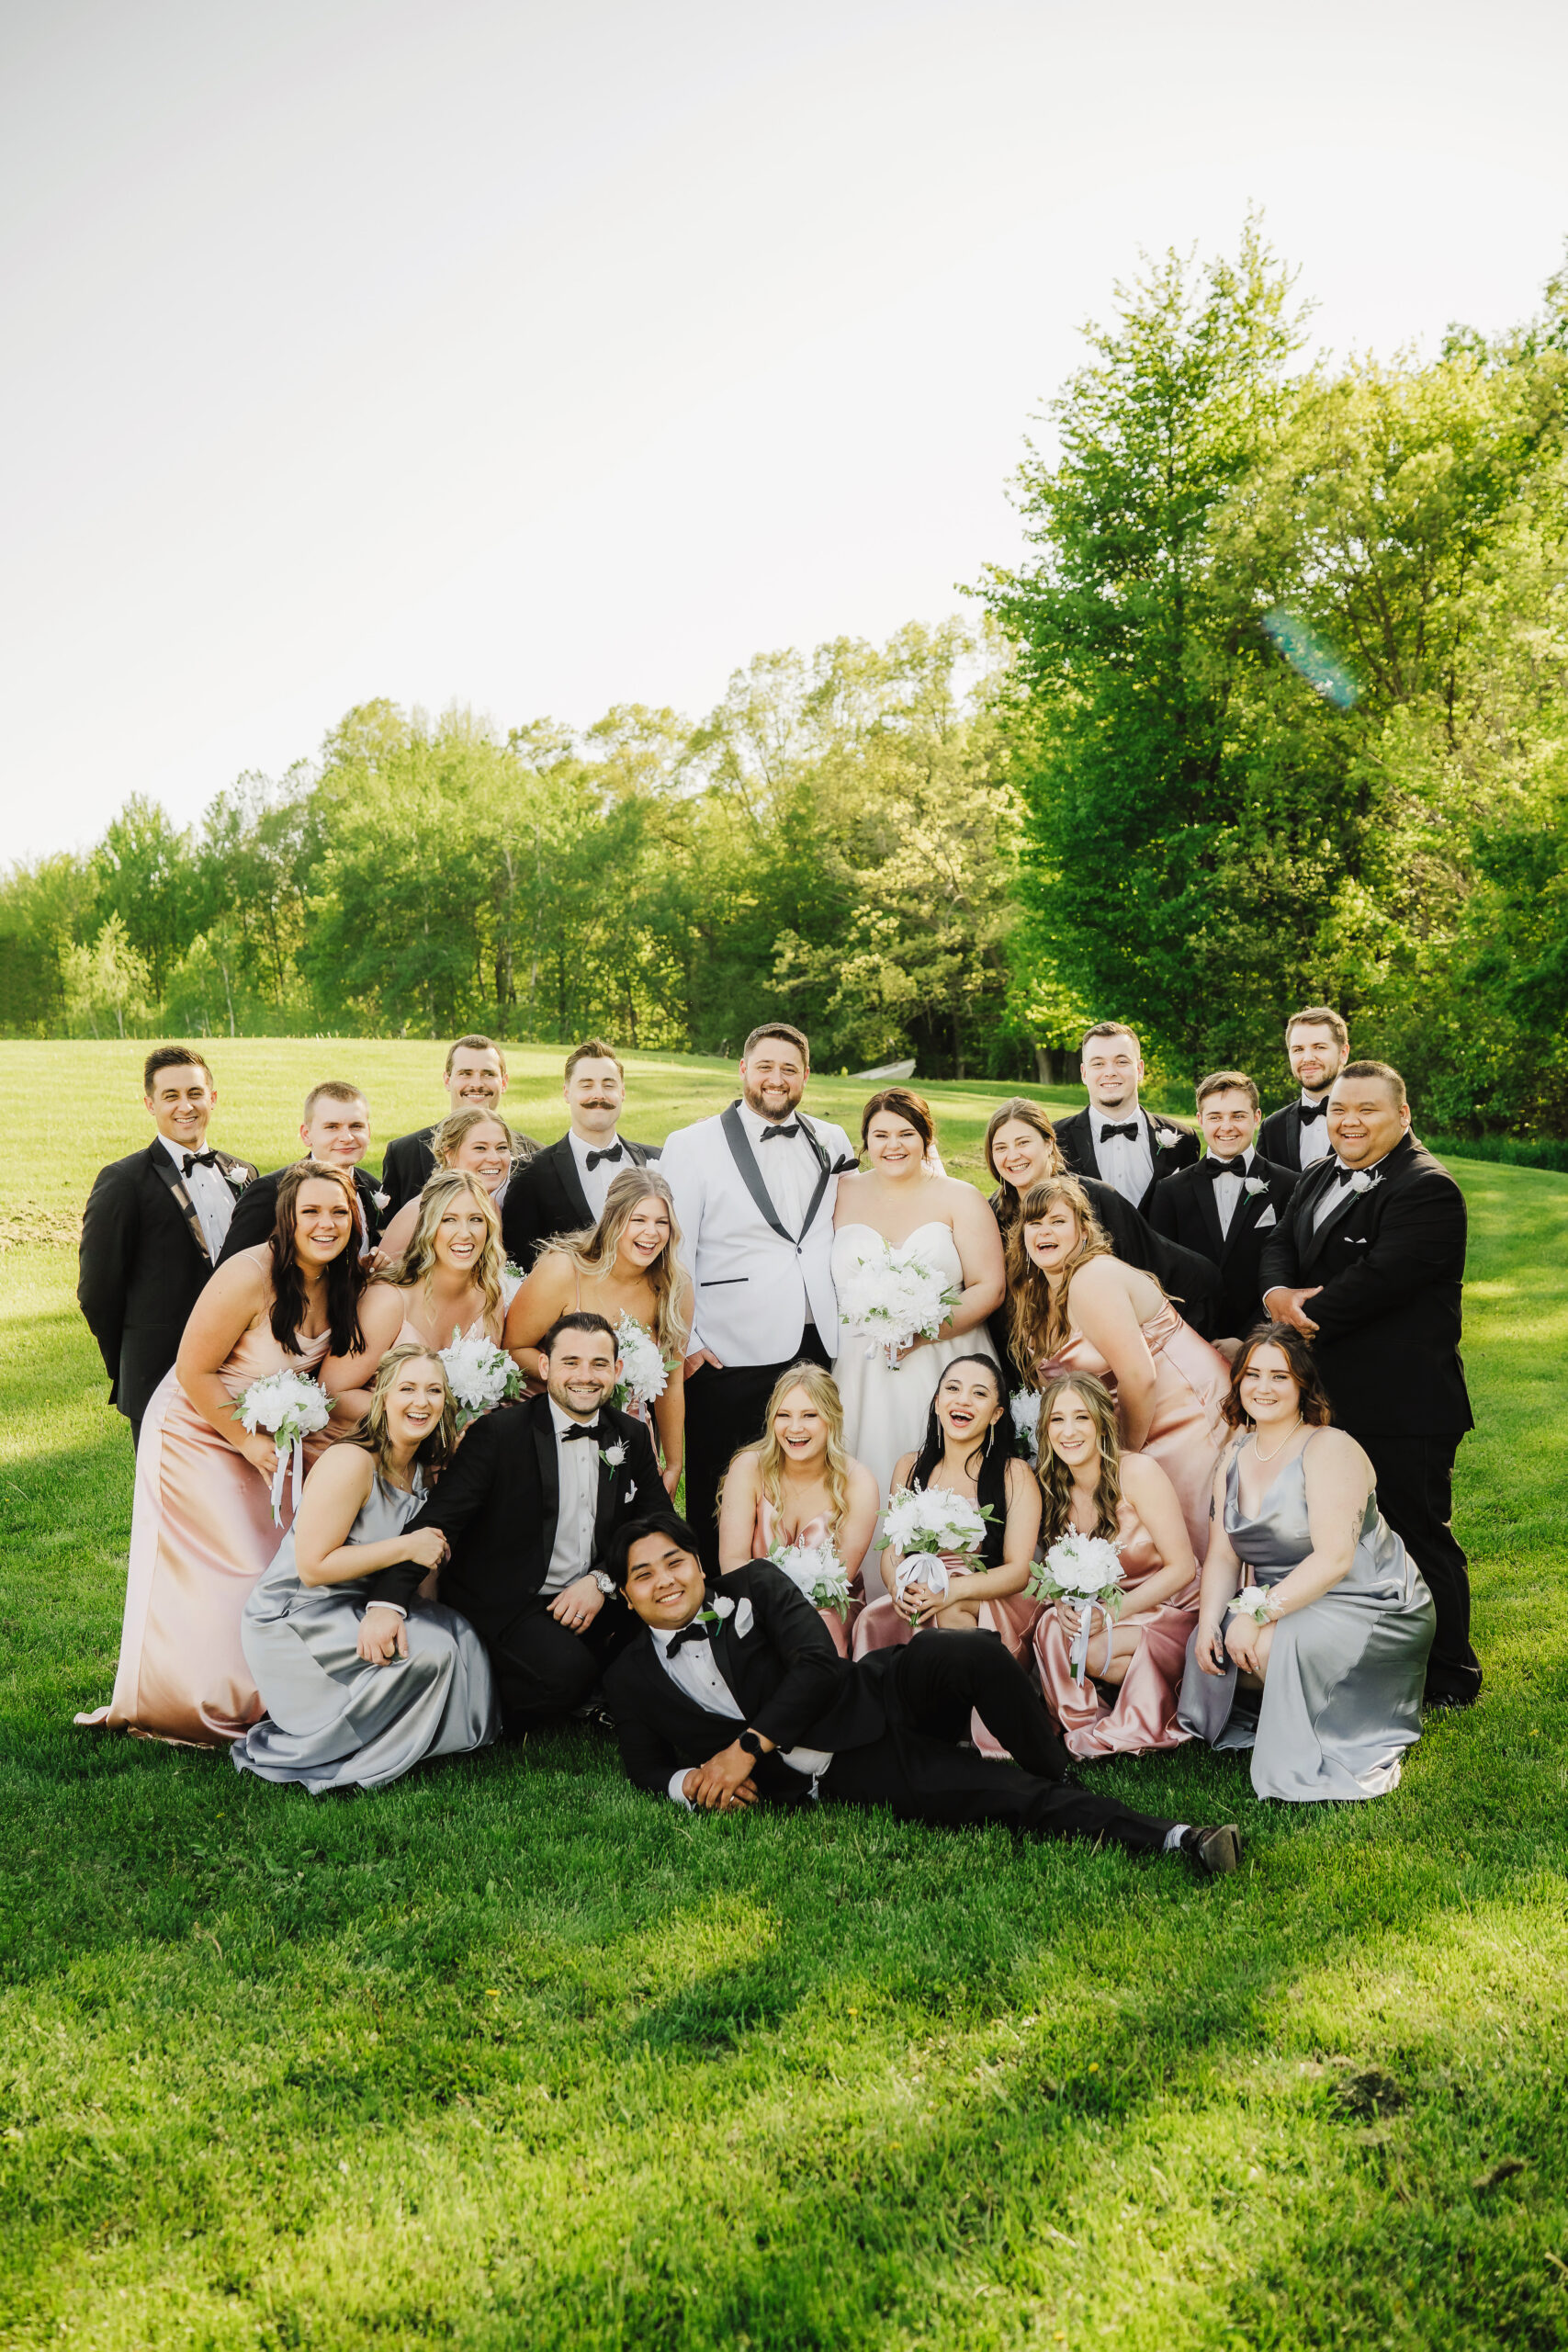 This bridal party group photo on the orchard lawn shows off all of their fun personalities. Bridal party photos Outdoor wedding Bridal party poses #dixonappleorchard #orchardweddingvenue #outdoorwedding #appleorchardwedding #wisconsinweddingvenue